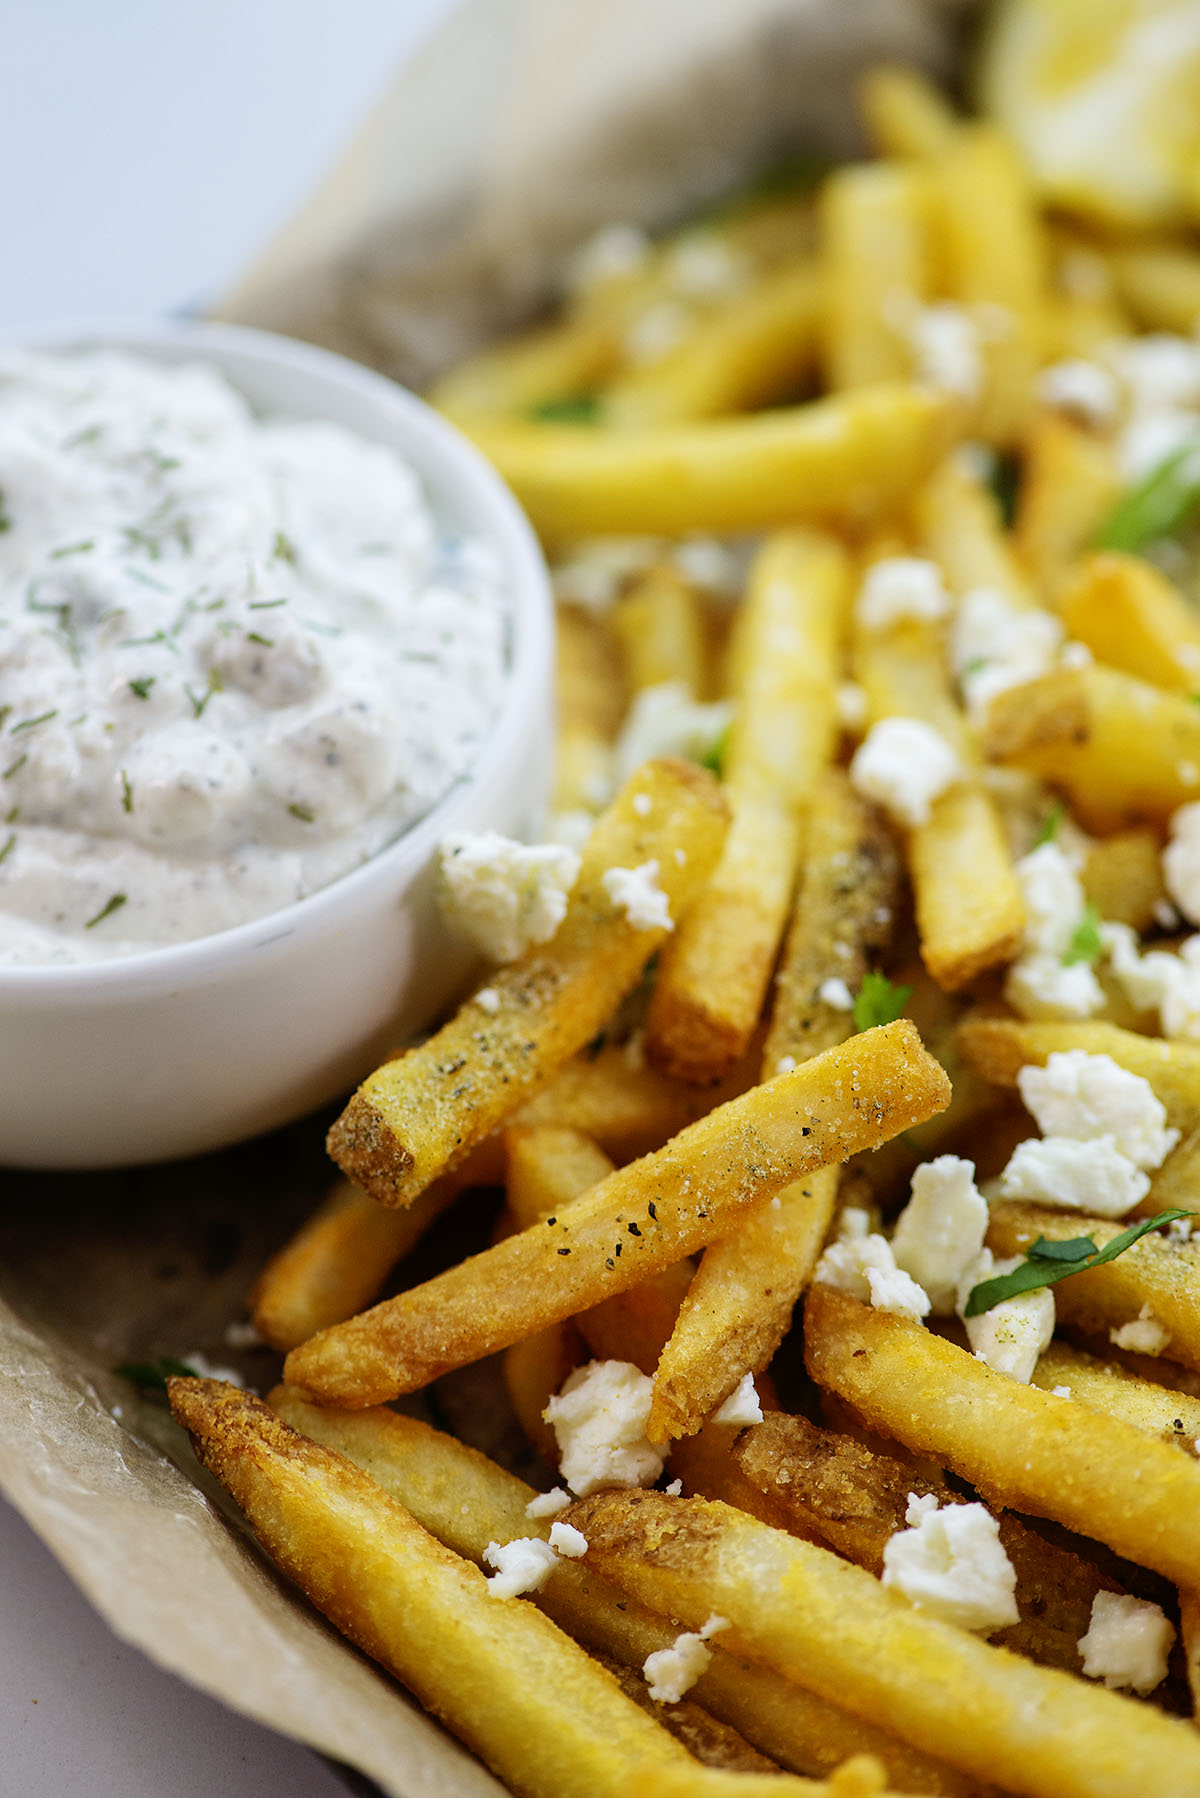 French fries with feta cheese and seasoning on them with a cup of tatziki sauce.